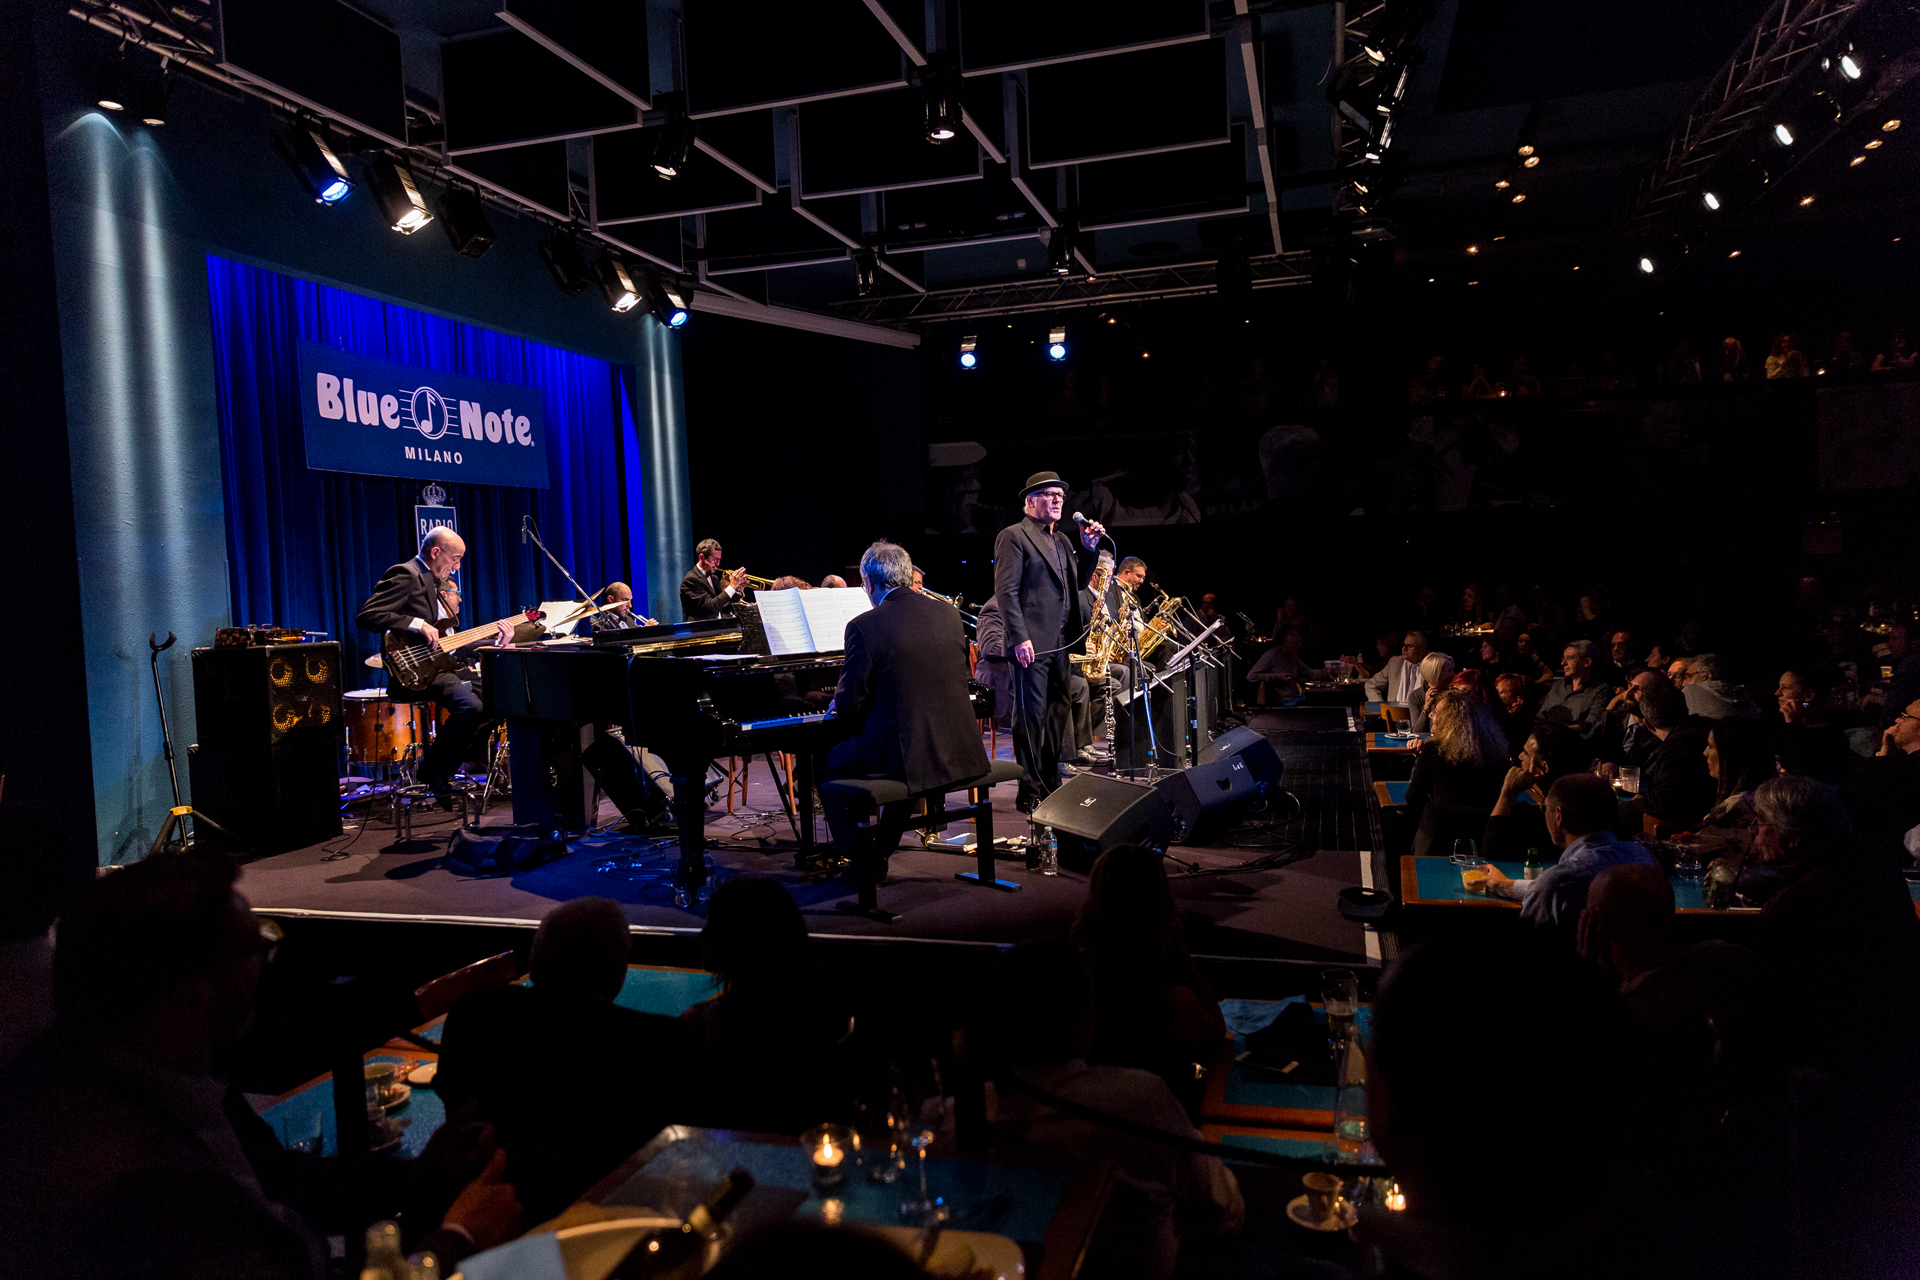 2016_10_15_Nick_Orchestra_Blue_Note_212342_5D3_7992